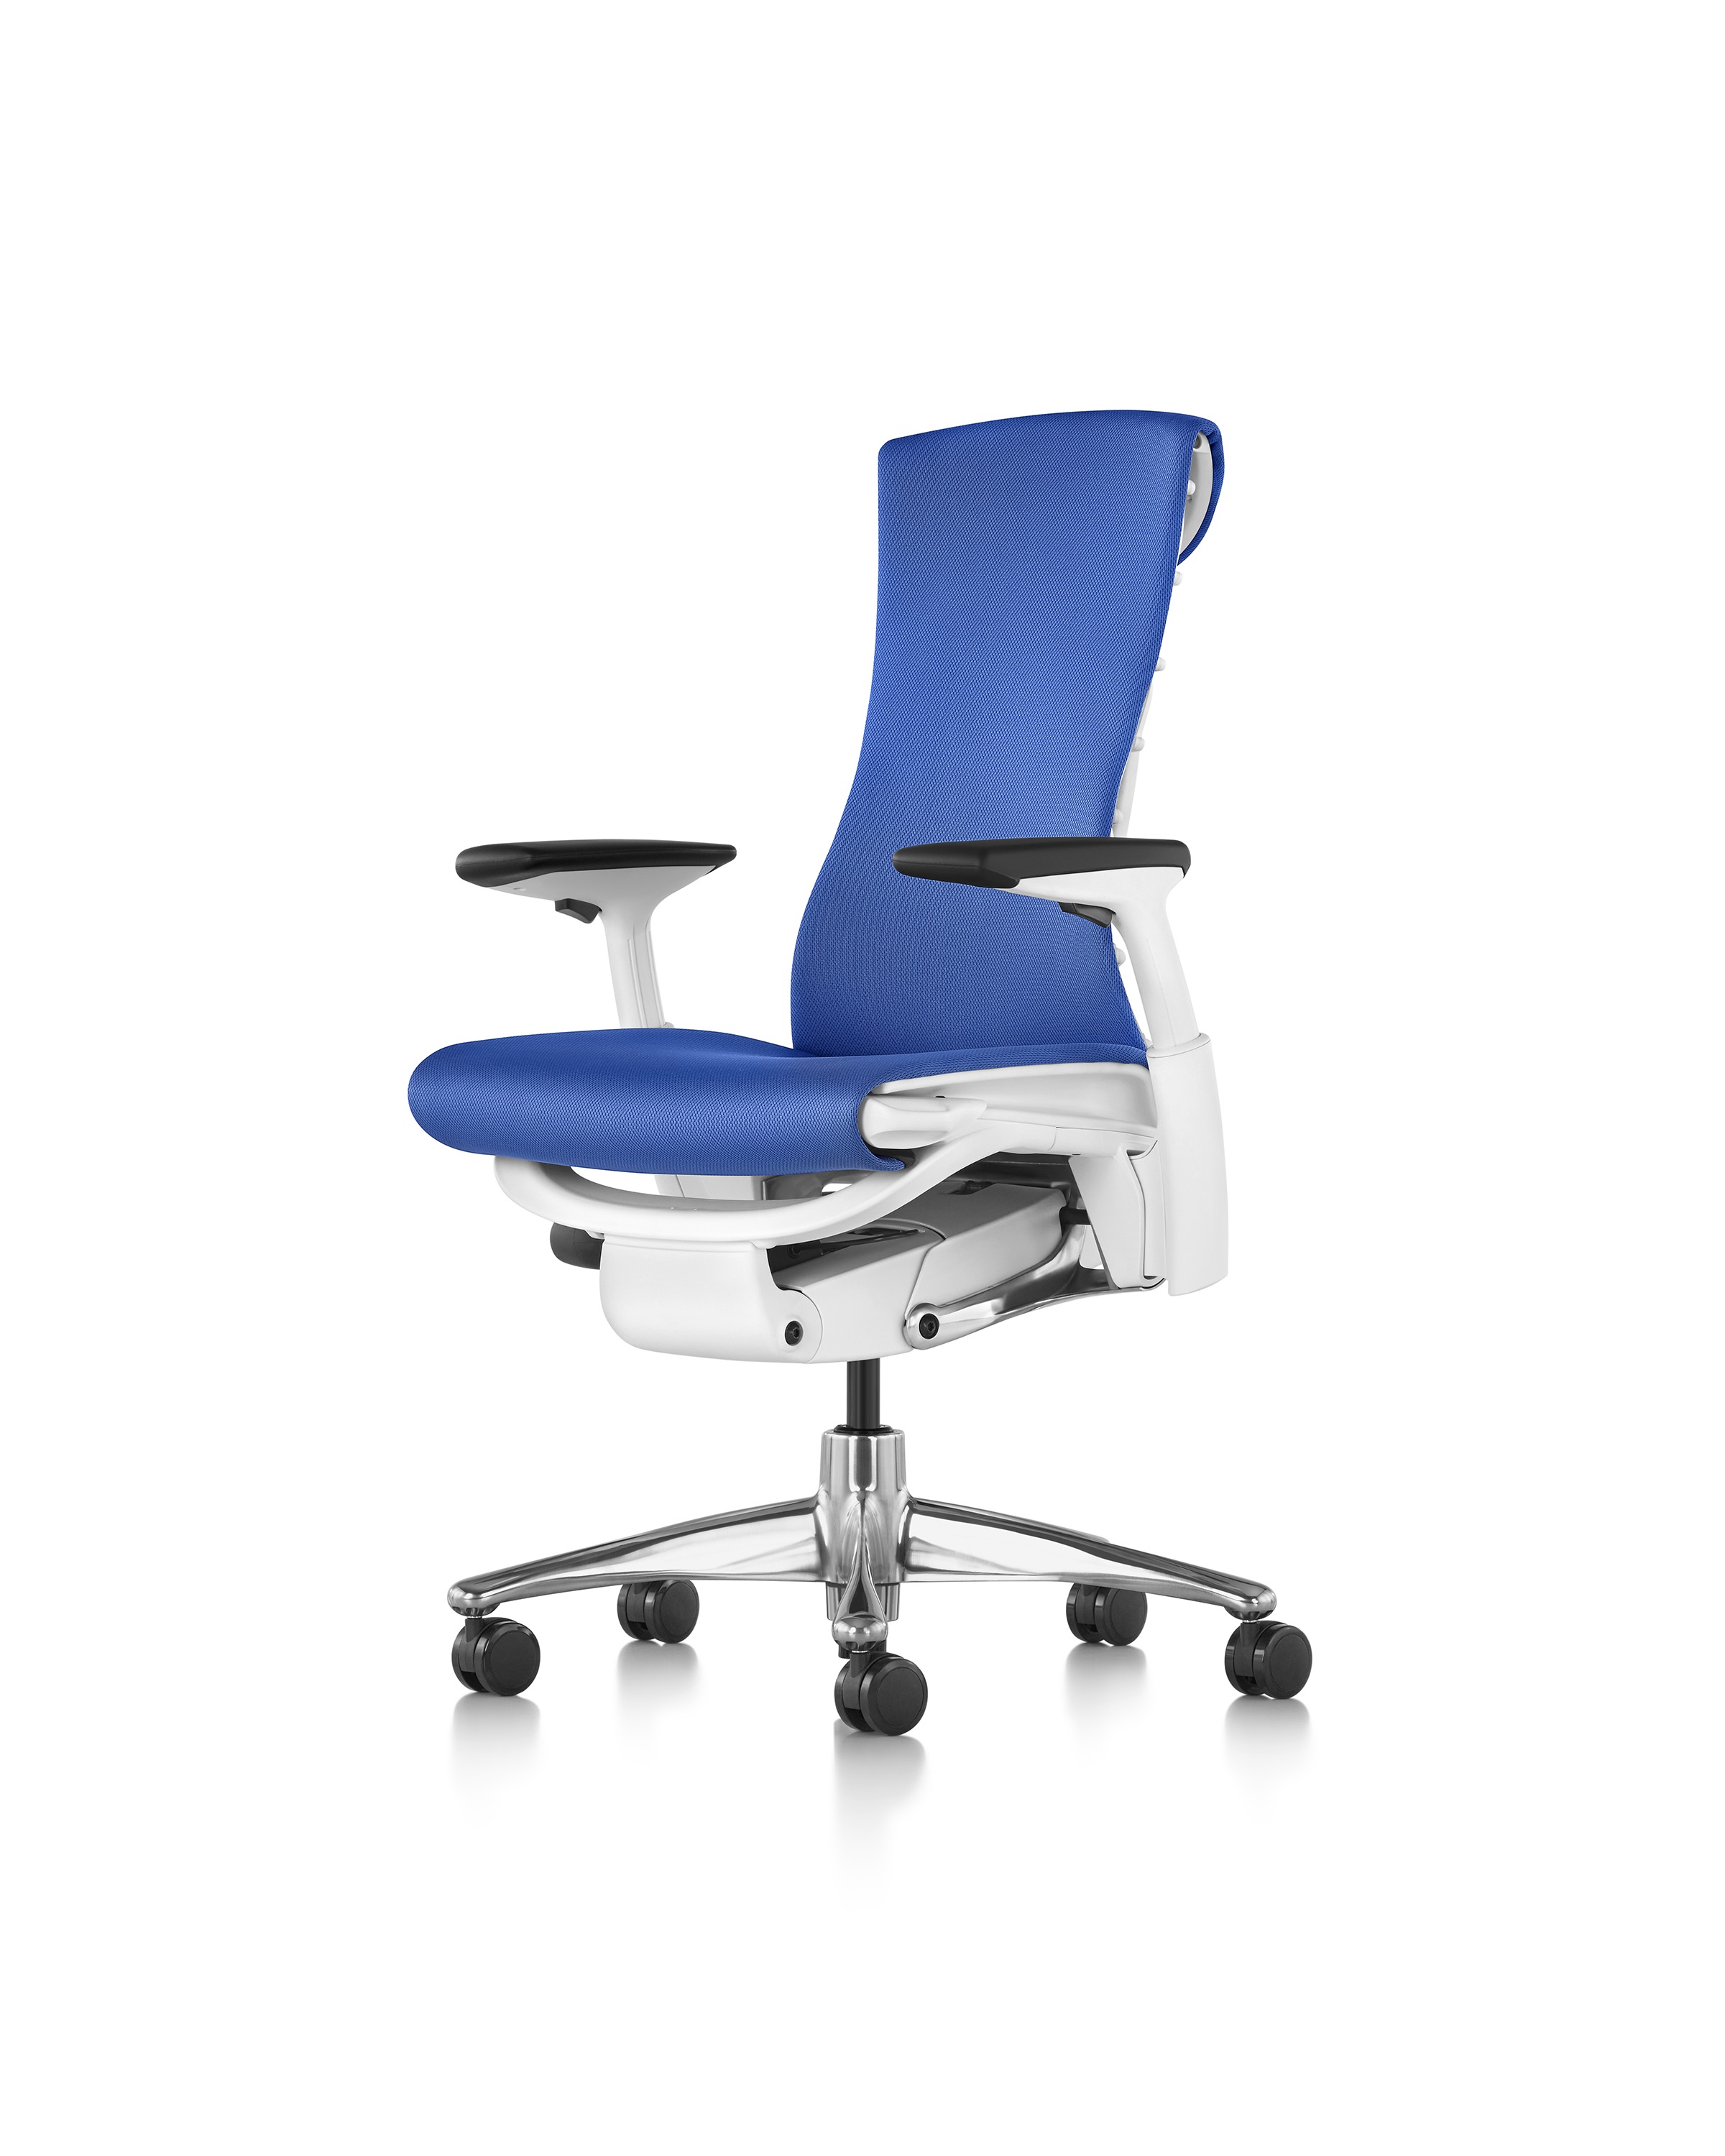 front view of blue embody chair